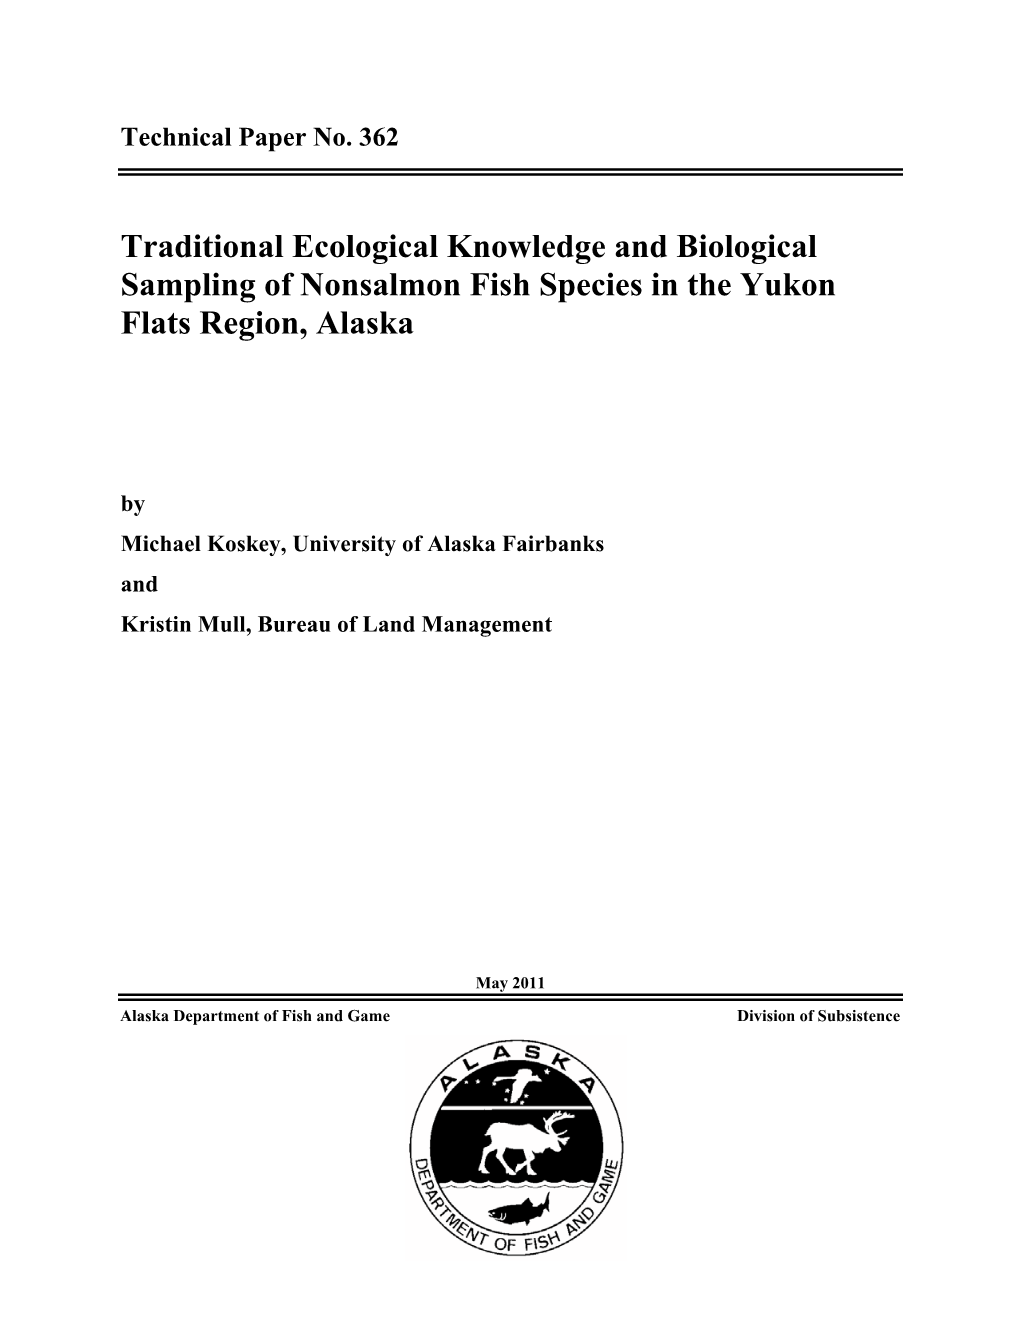 Traditional Ecological Knowledge and Biological Sampling of Nonsalmon Fish Species in the Yukon Flats Region, Alaska